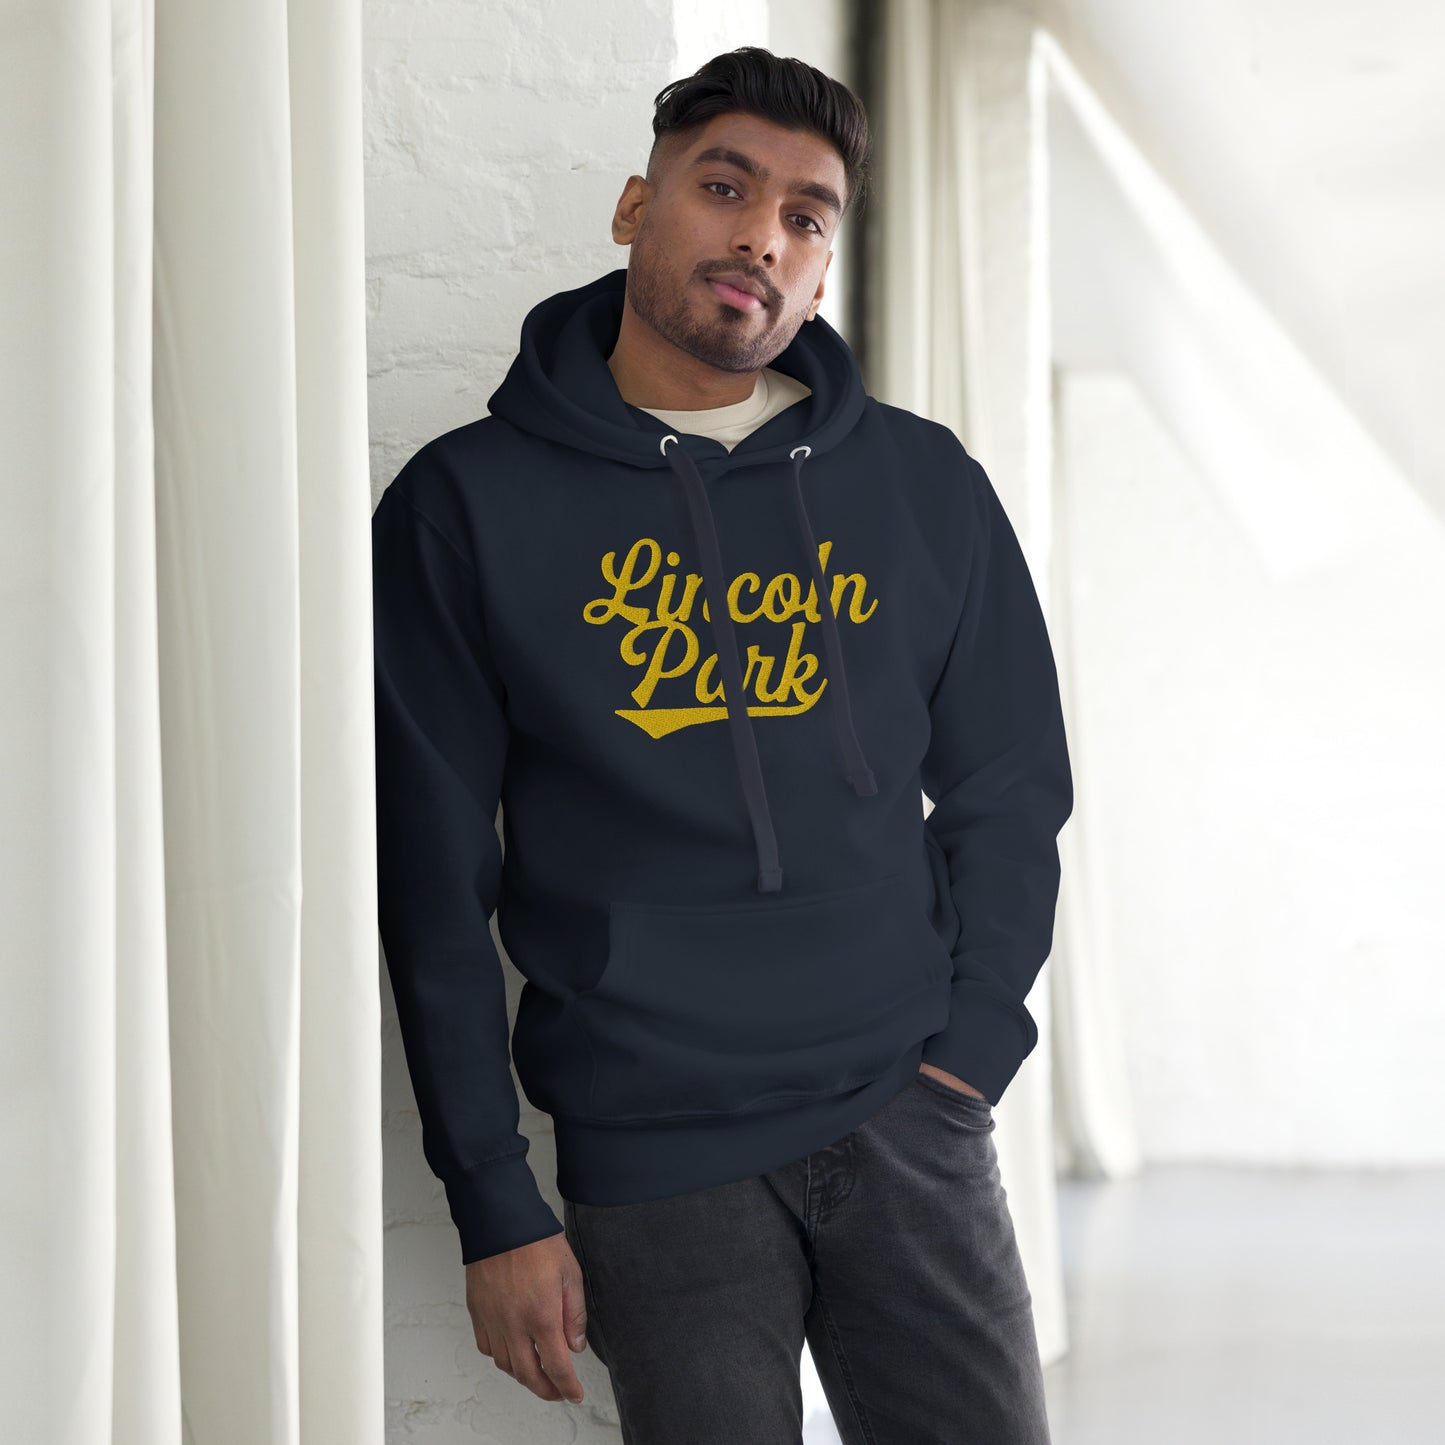 Embroidered Lincoln Park Hoodie | Lincoln Park Lions